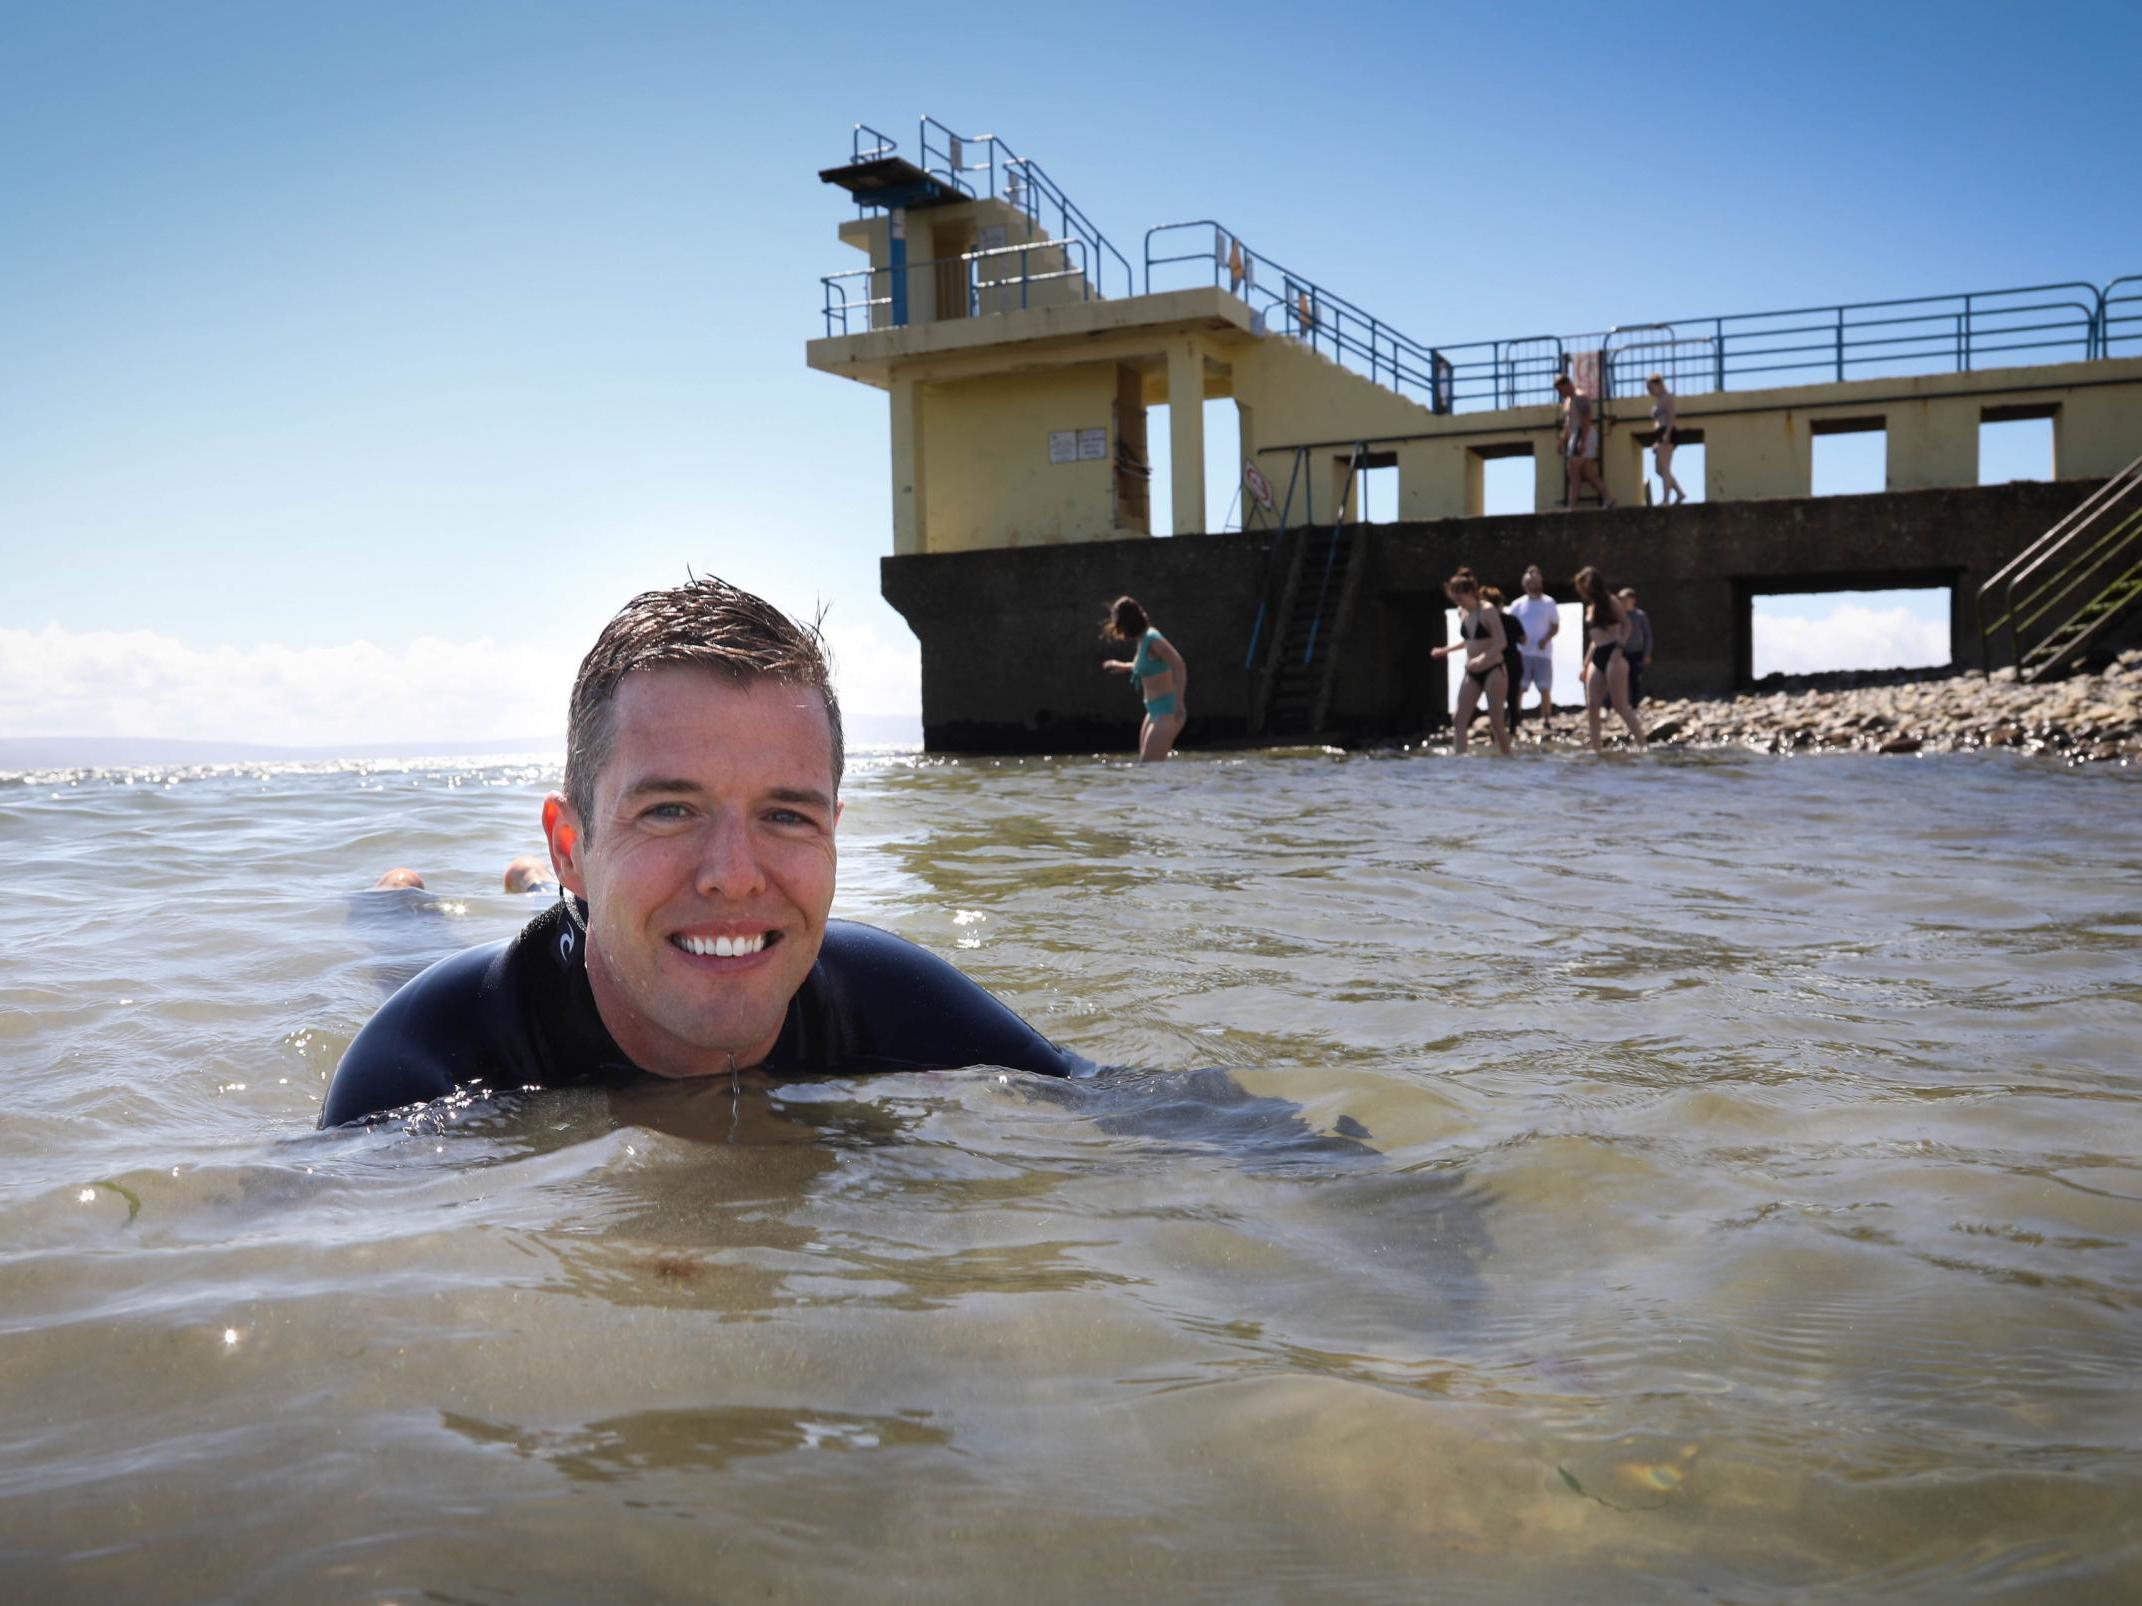 Dr Liam Burke, one of a team of researchers at NUI Galway who are studying whether recreational waters contain potentially deadly bacteria, is pictured at Blackrock, Salhill in Galway.